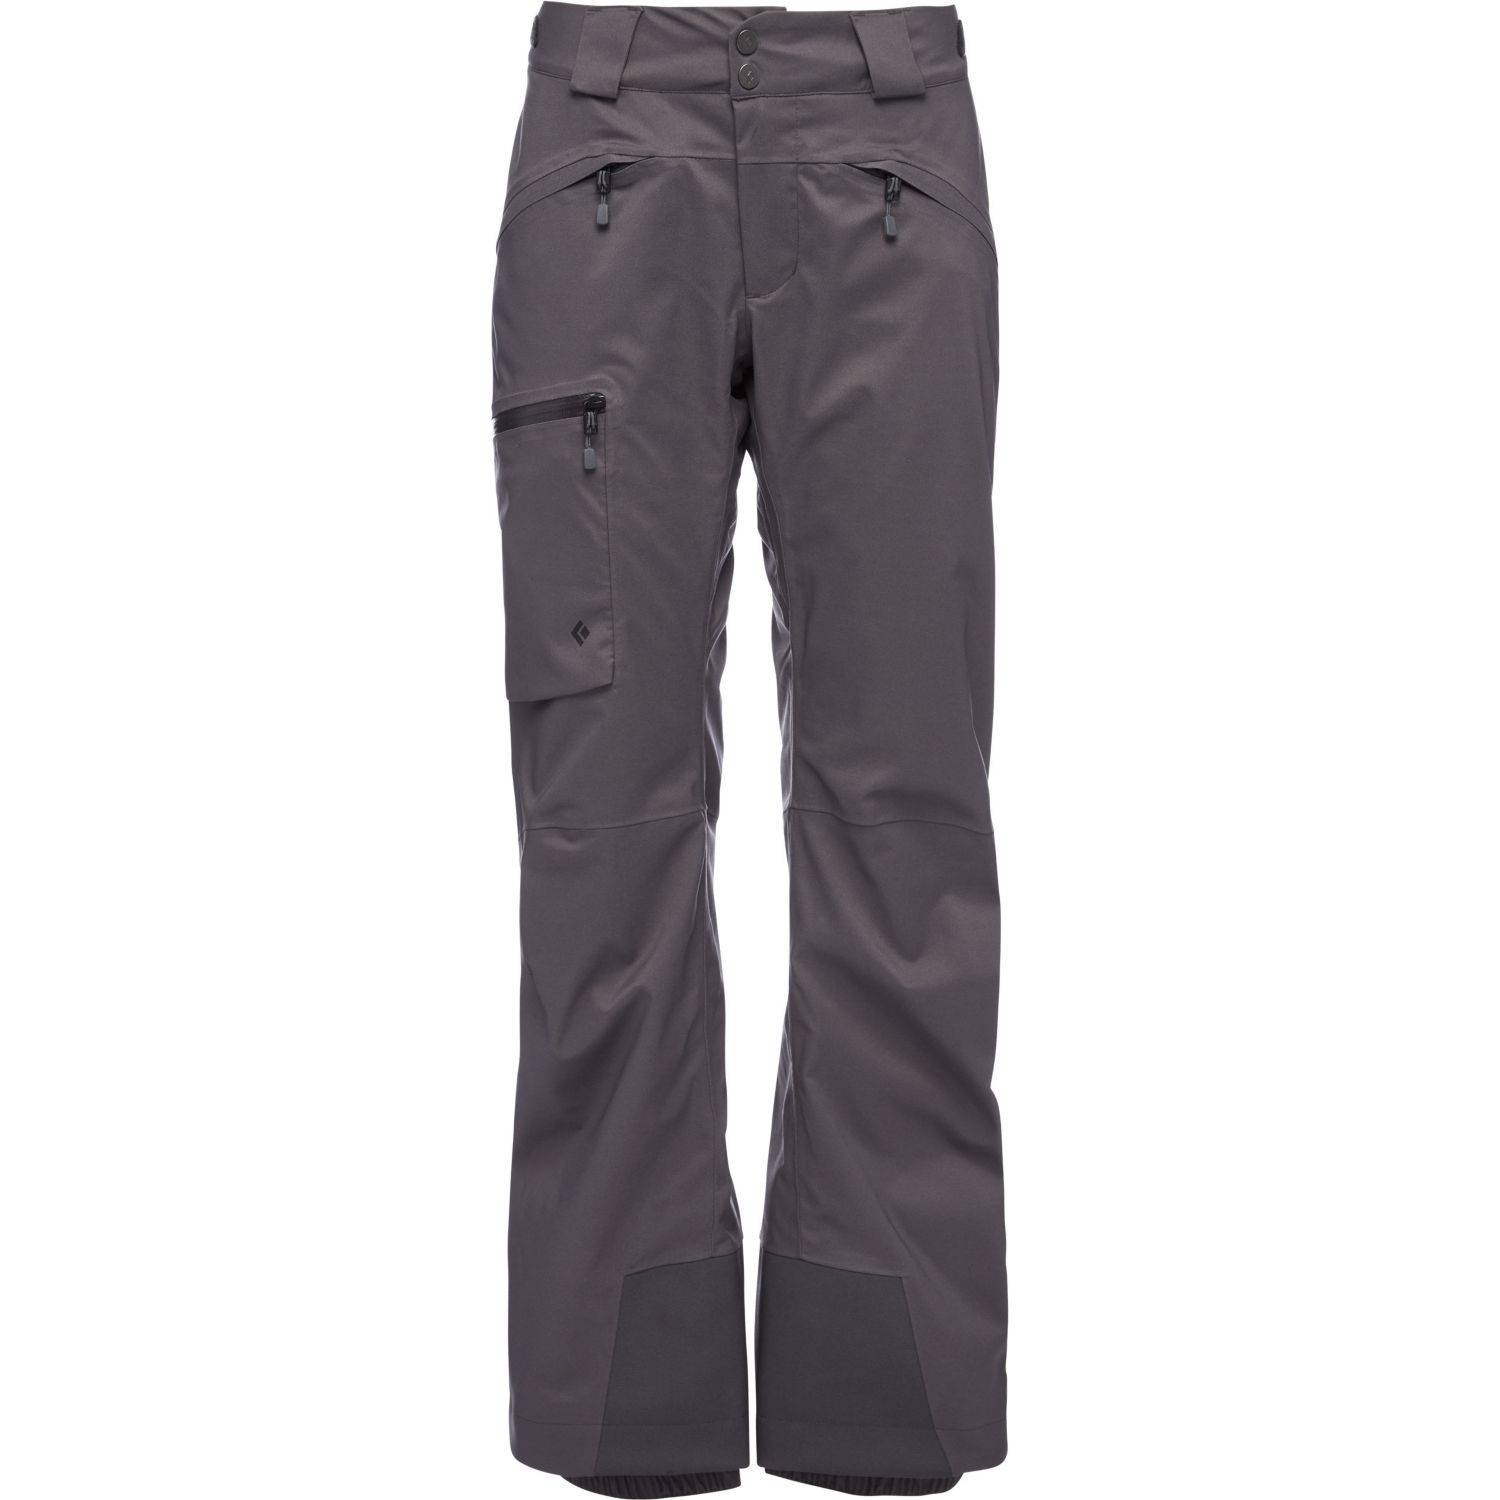 Boundary Insulated Pant Wms